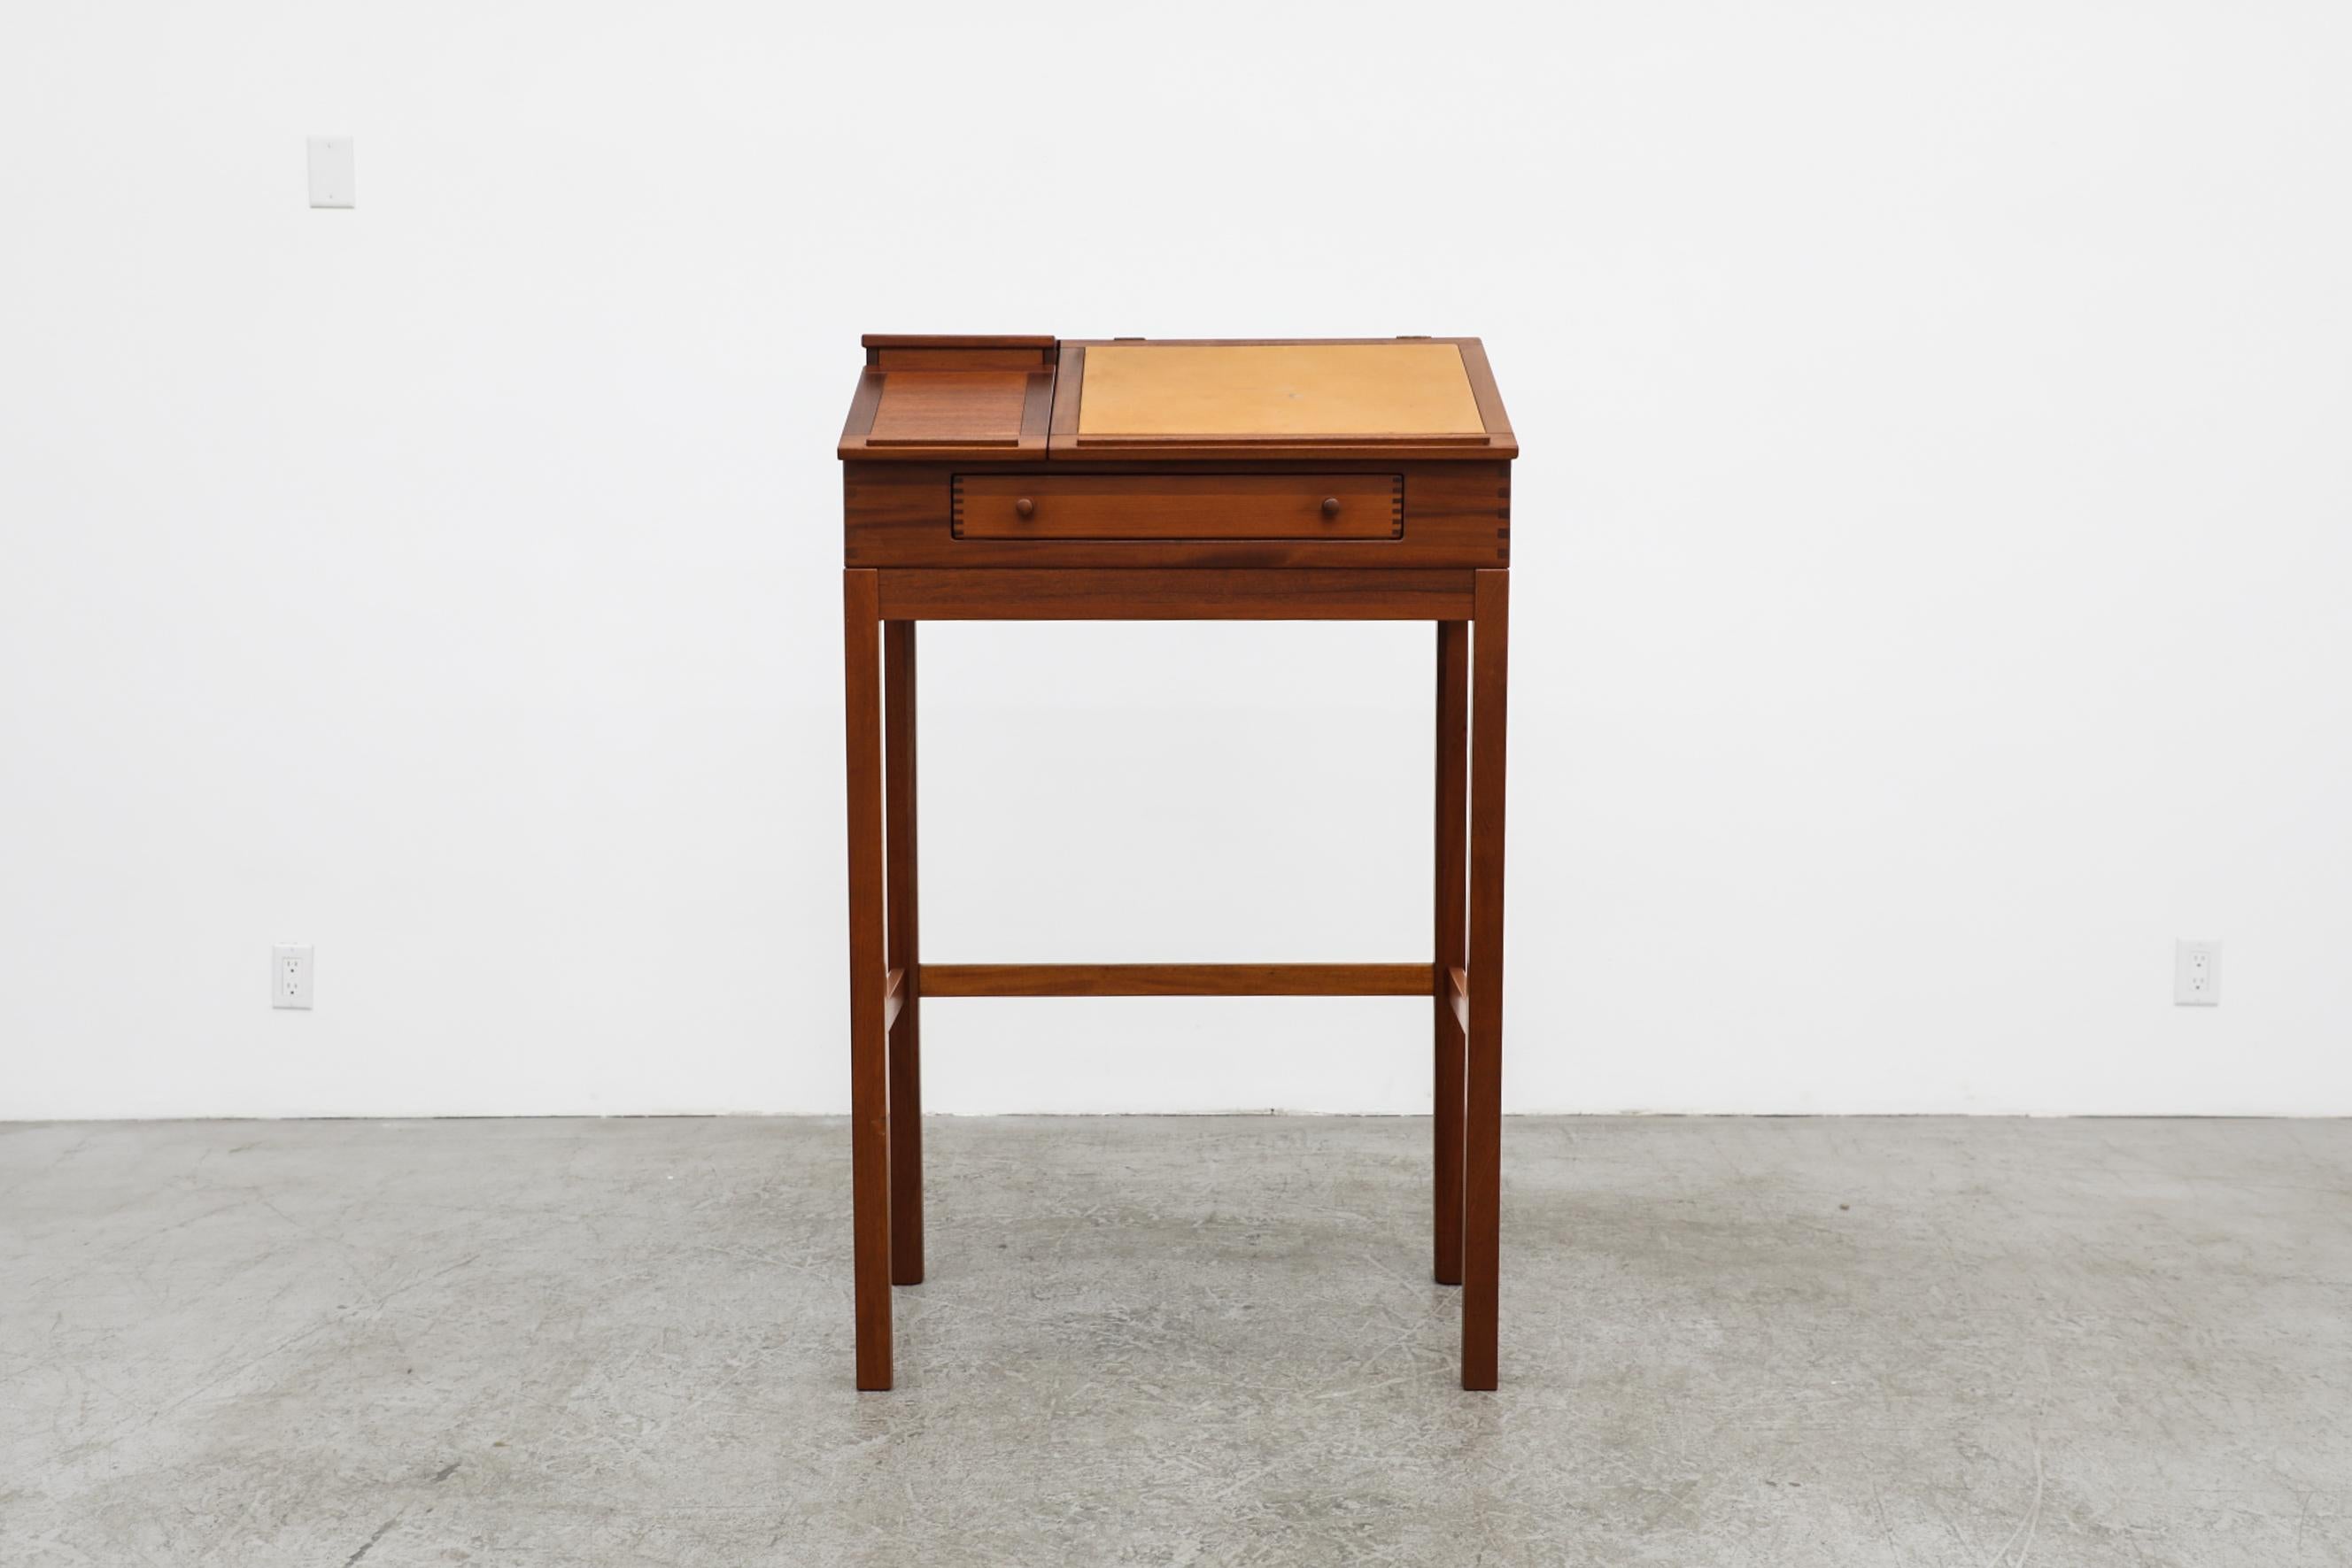 The top with writing pad and built in notebook holder, with storage inside and a drawer underneath. In original condition with visible wear, consistent with its age and use.

Mid-Century designed lectern by Andreas Hansen, Denmark, 1960's. The